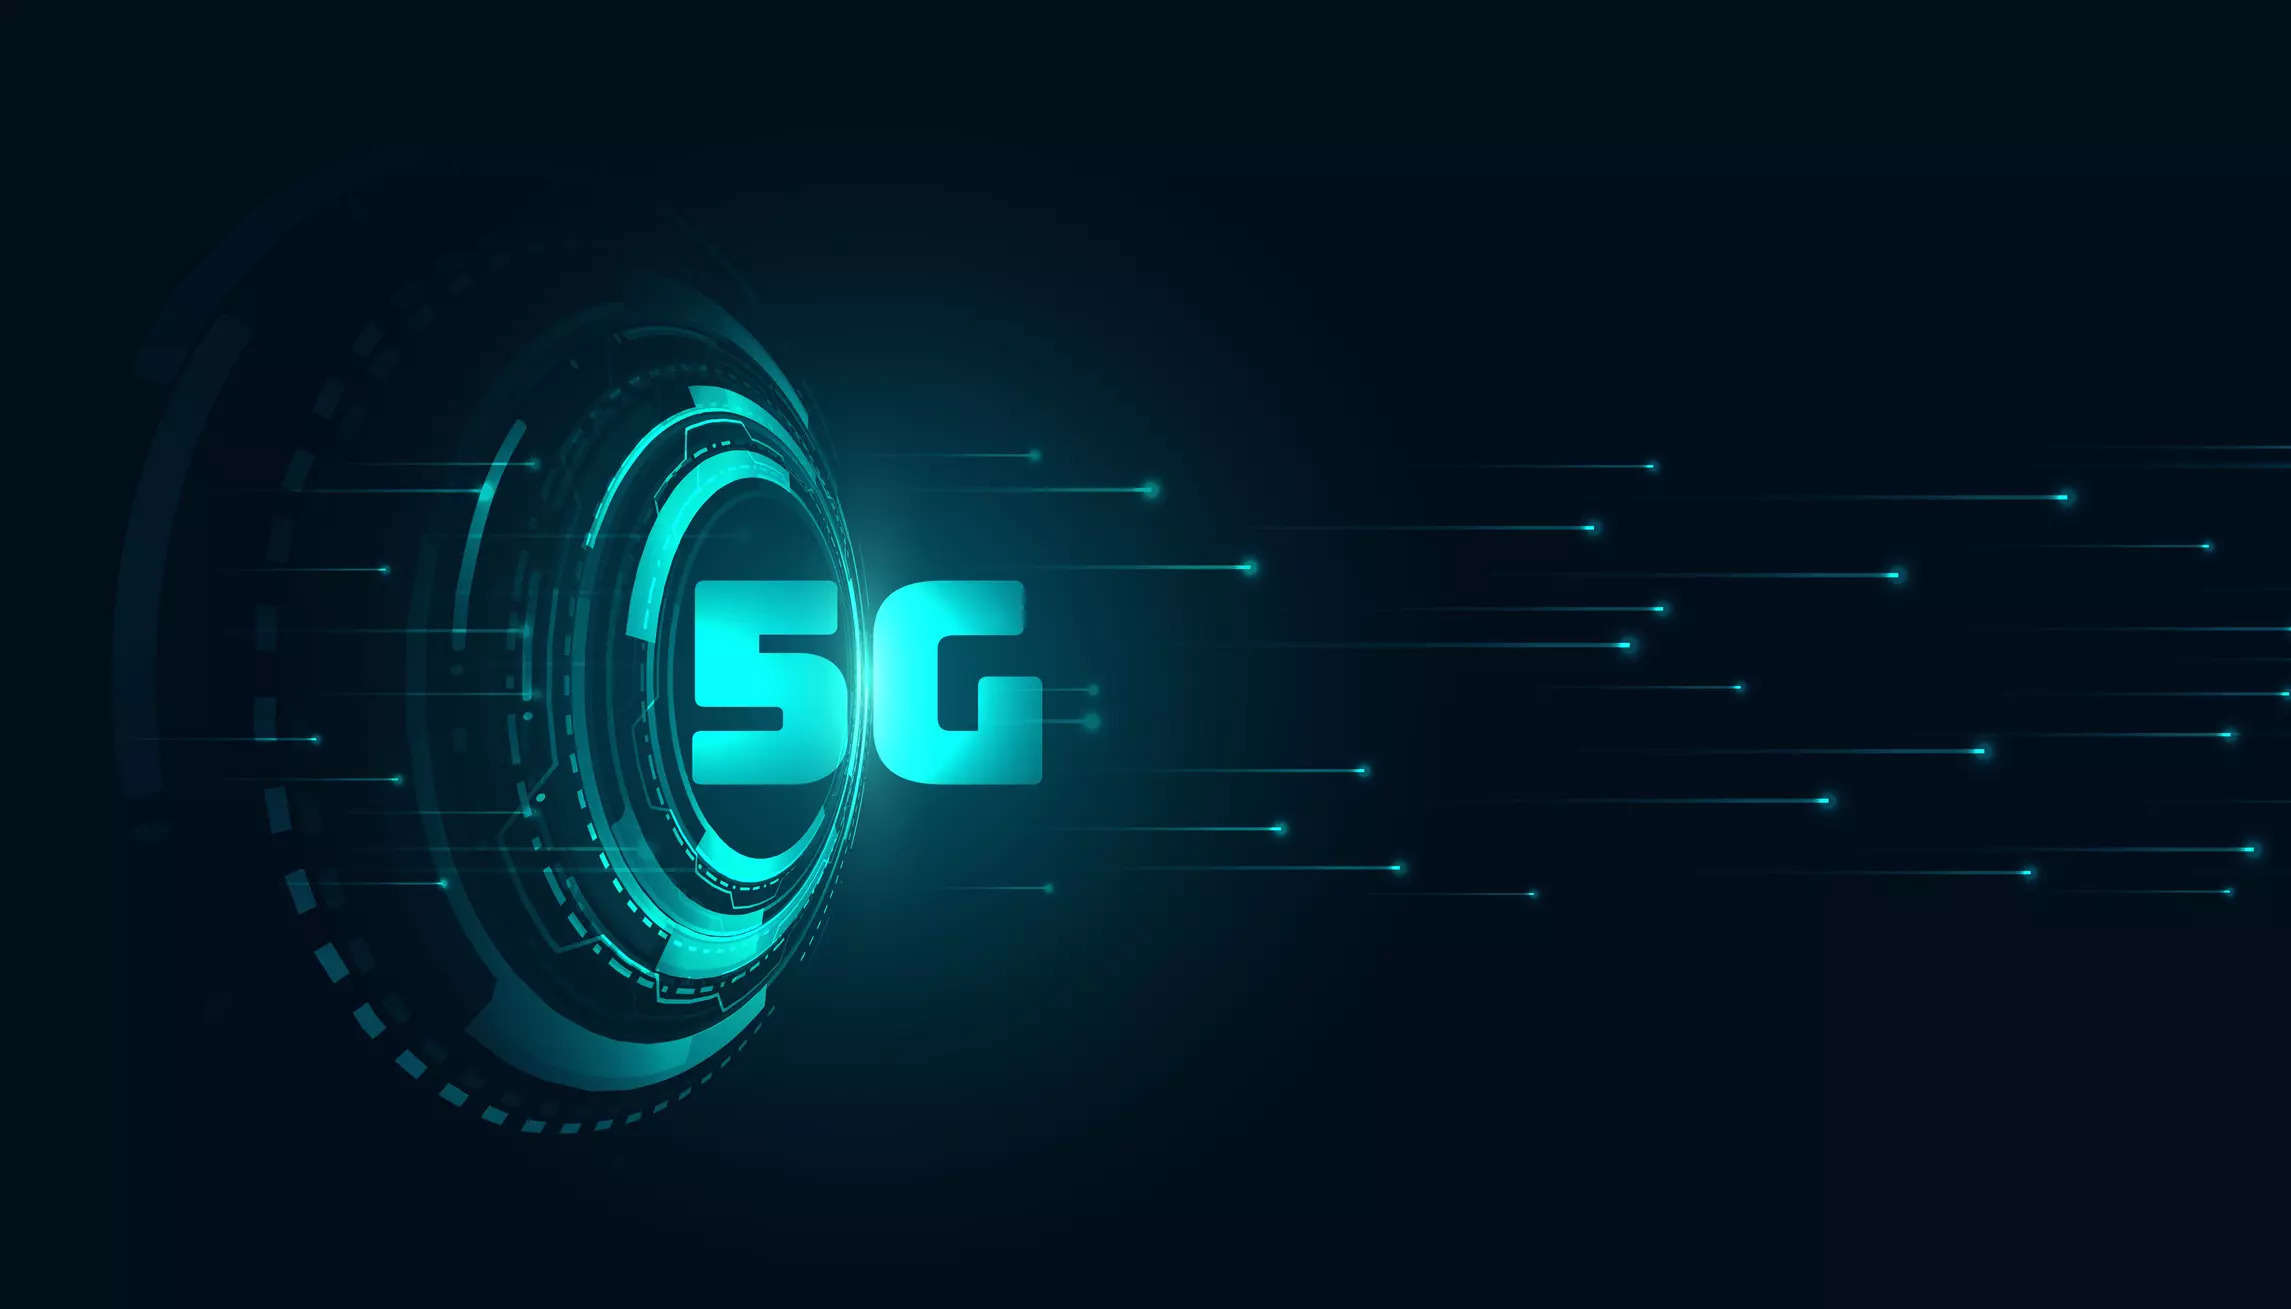 Japan’s NEC sets up $150 million CVC fund to invest in 5G, 6G, technology & services